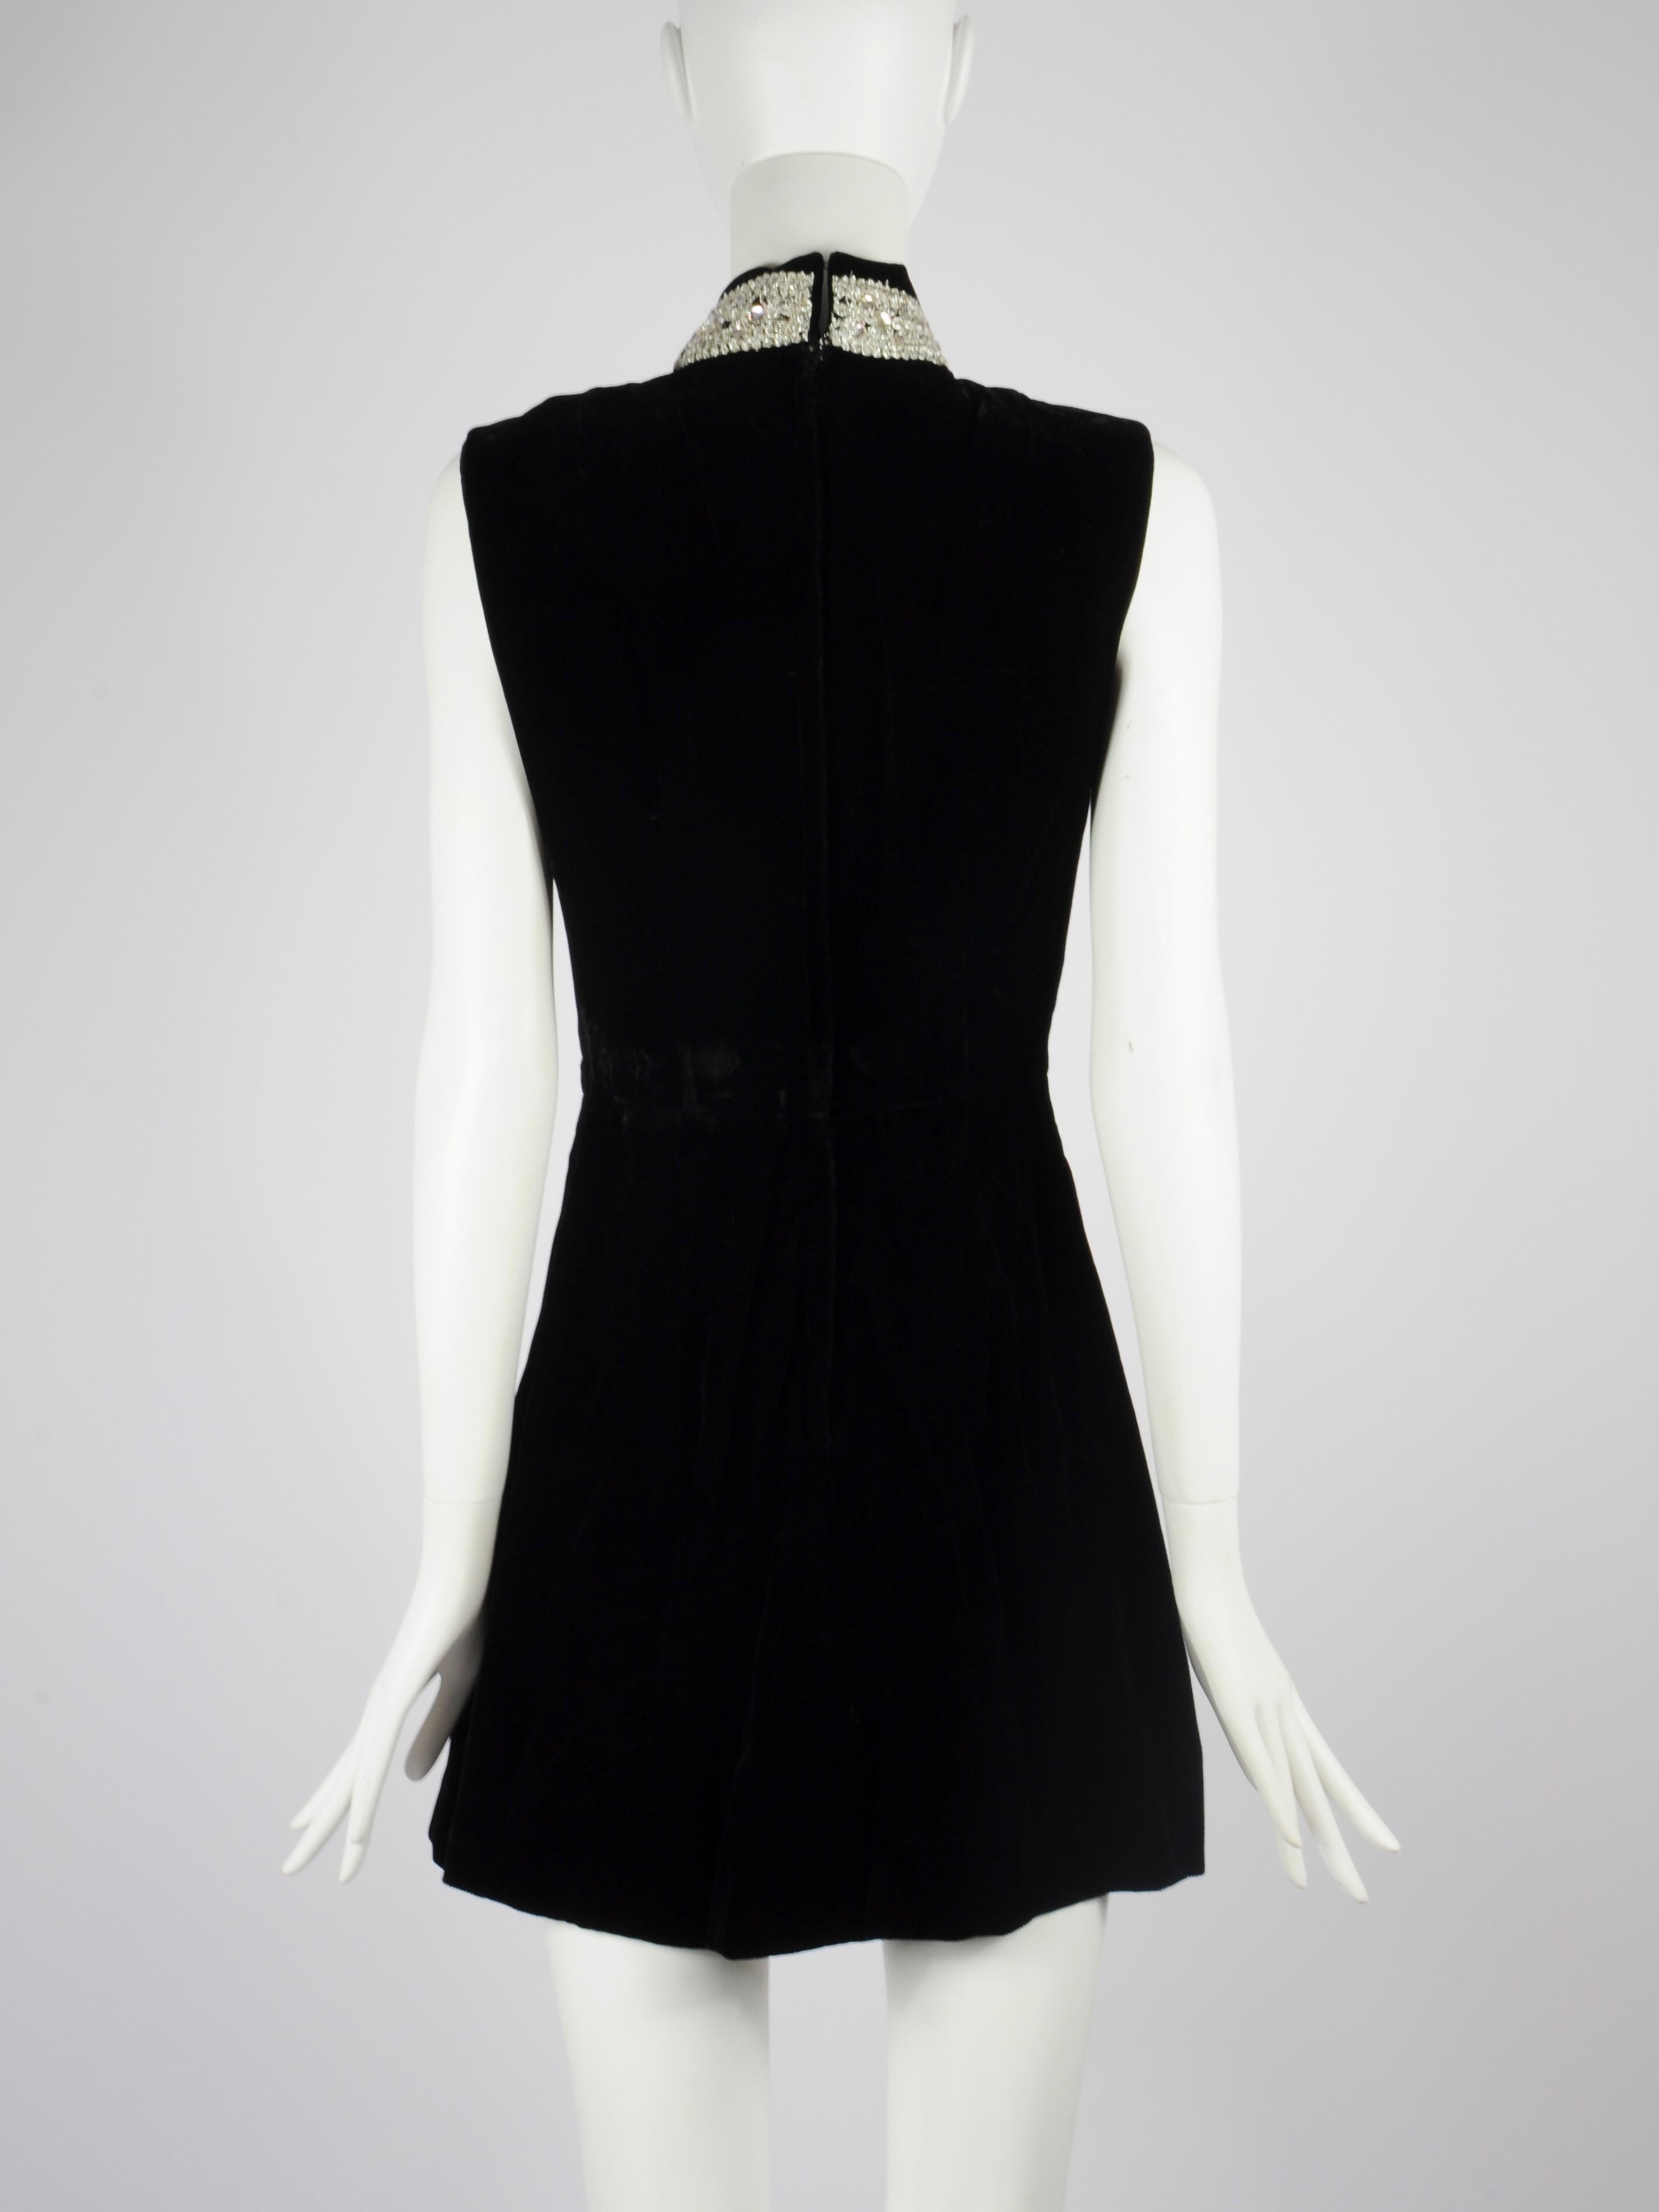 Victor Costa Romantica Velvet Mini Cocktail Dress with Silver Embroidery 1970s 3